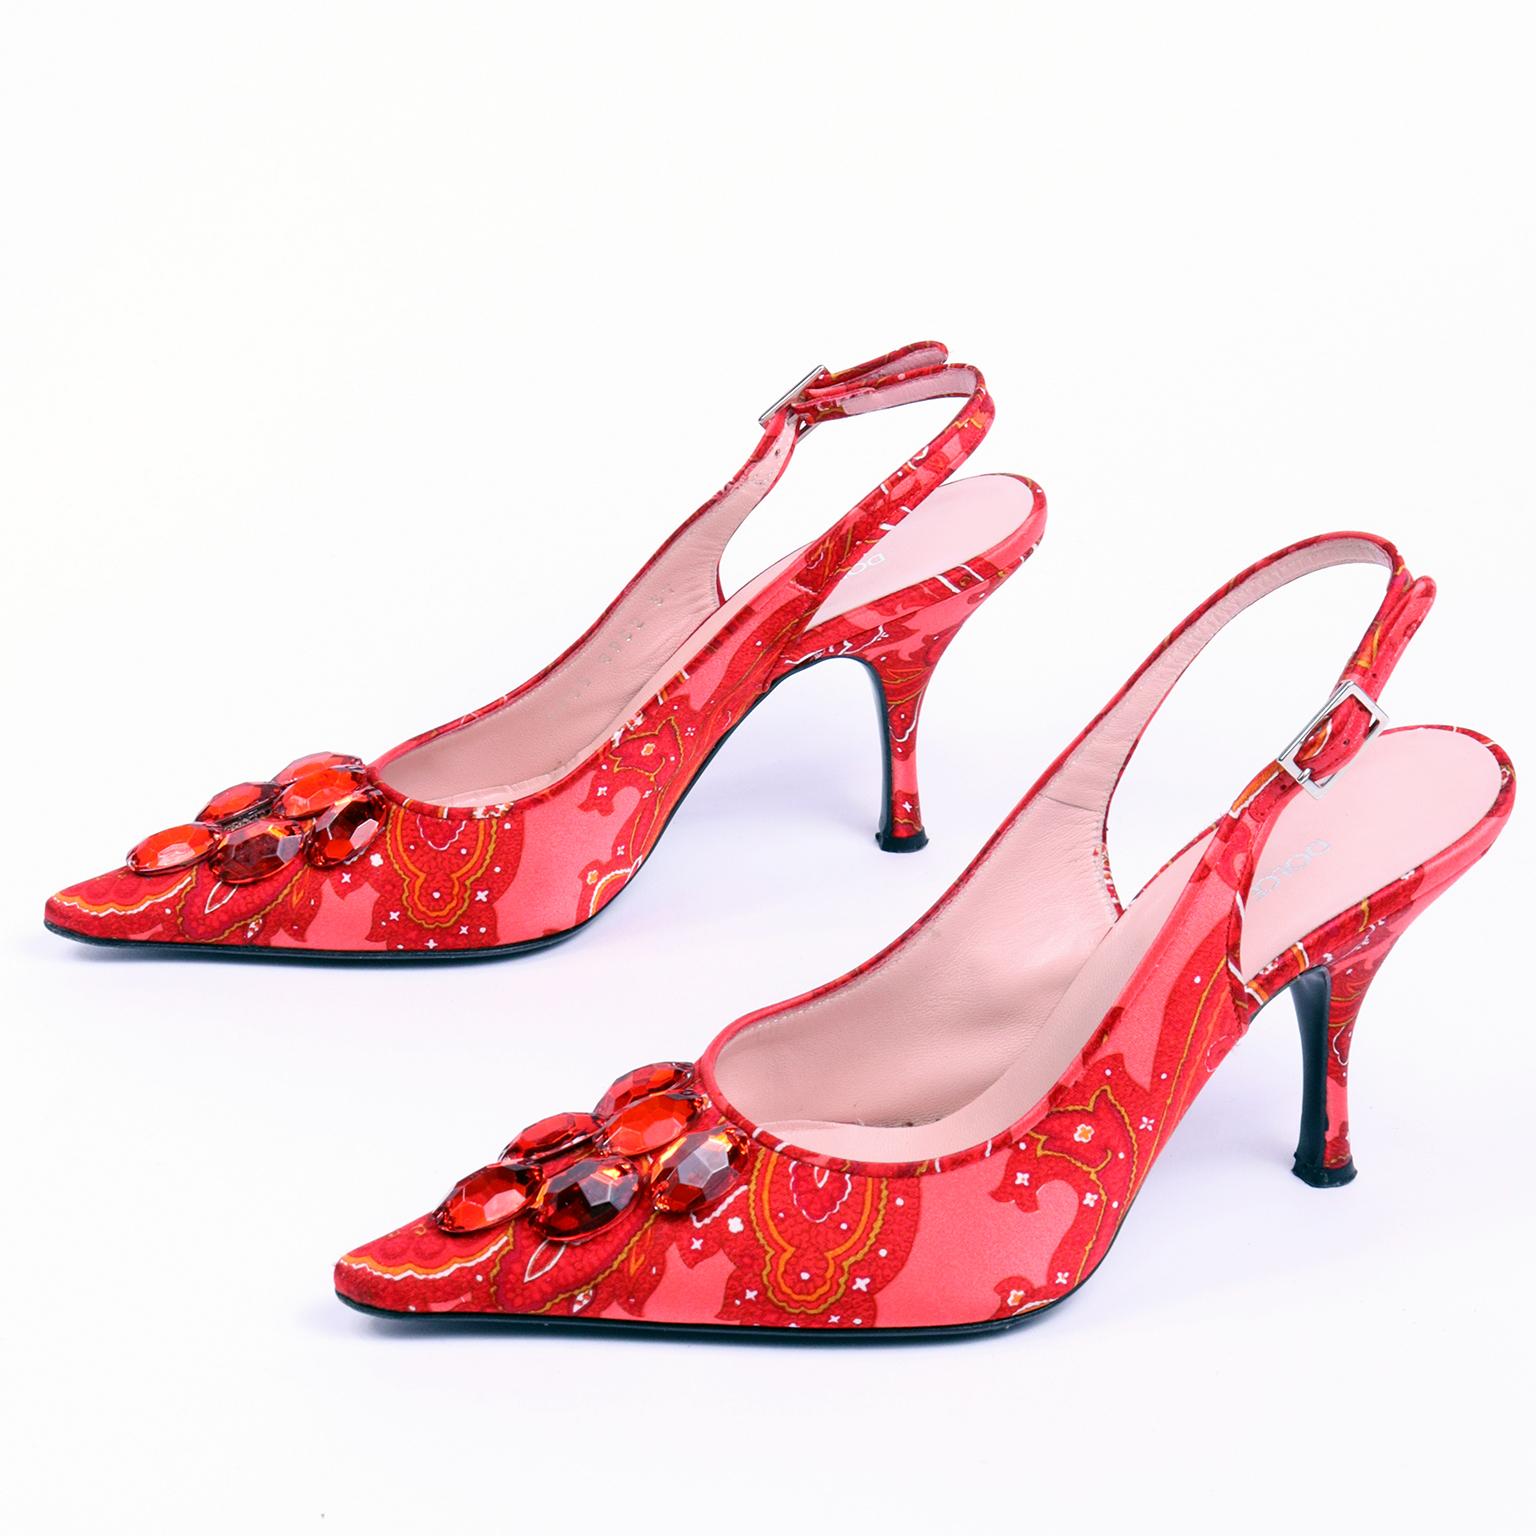 Dolce & Gabbana Shoes in Red Floral Baroque Print Slingback Heels Size 37 1